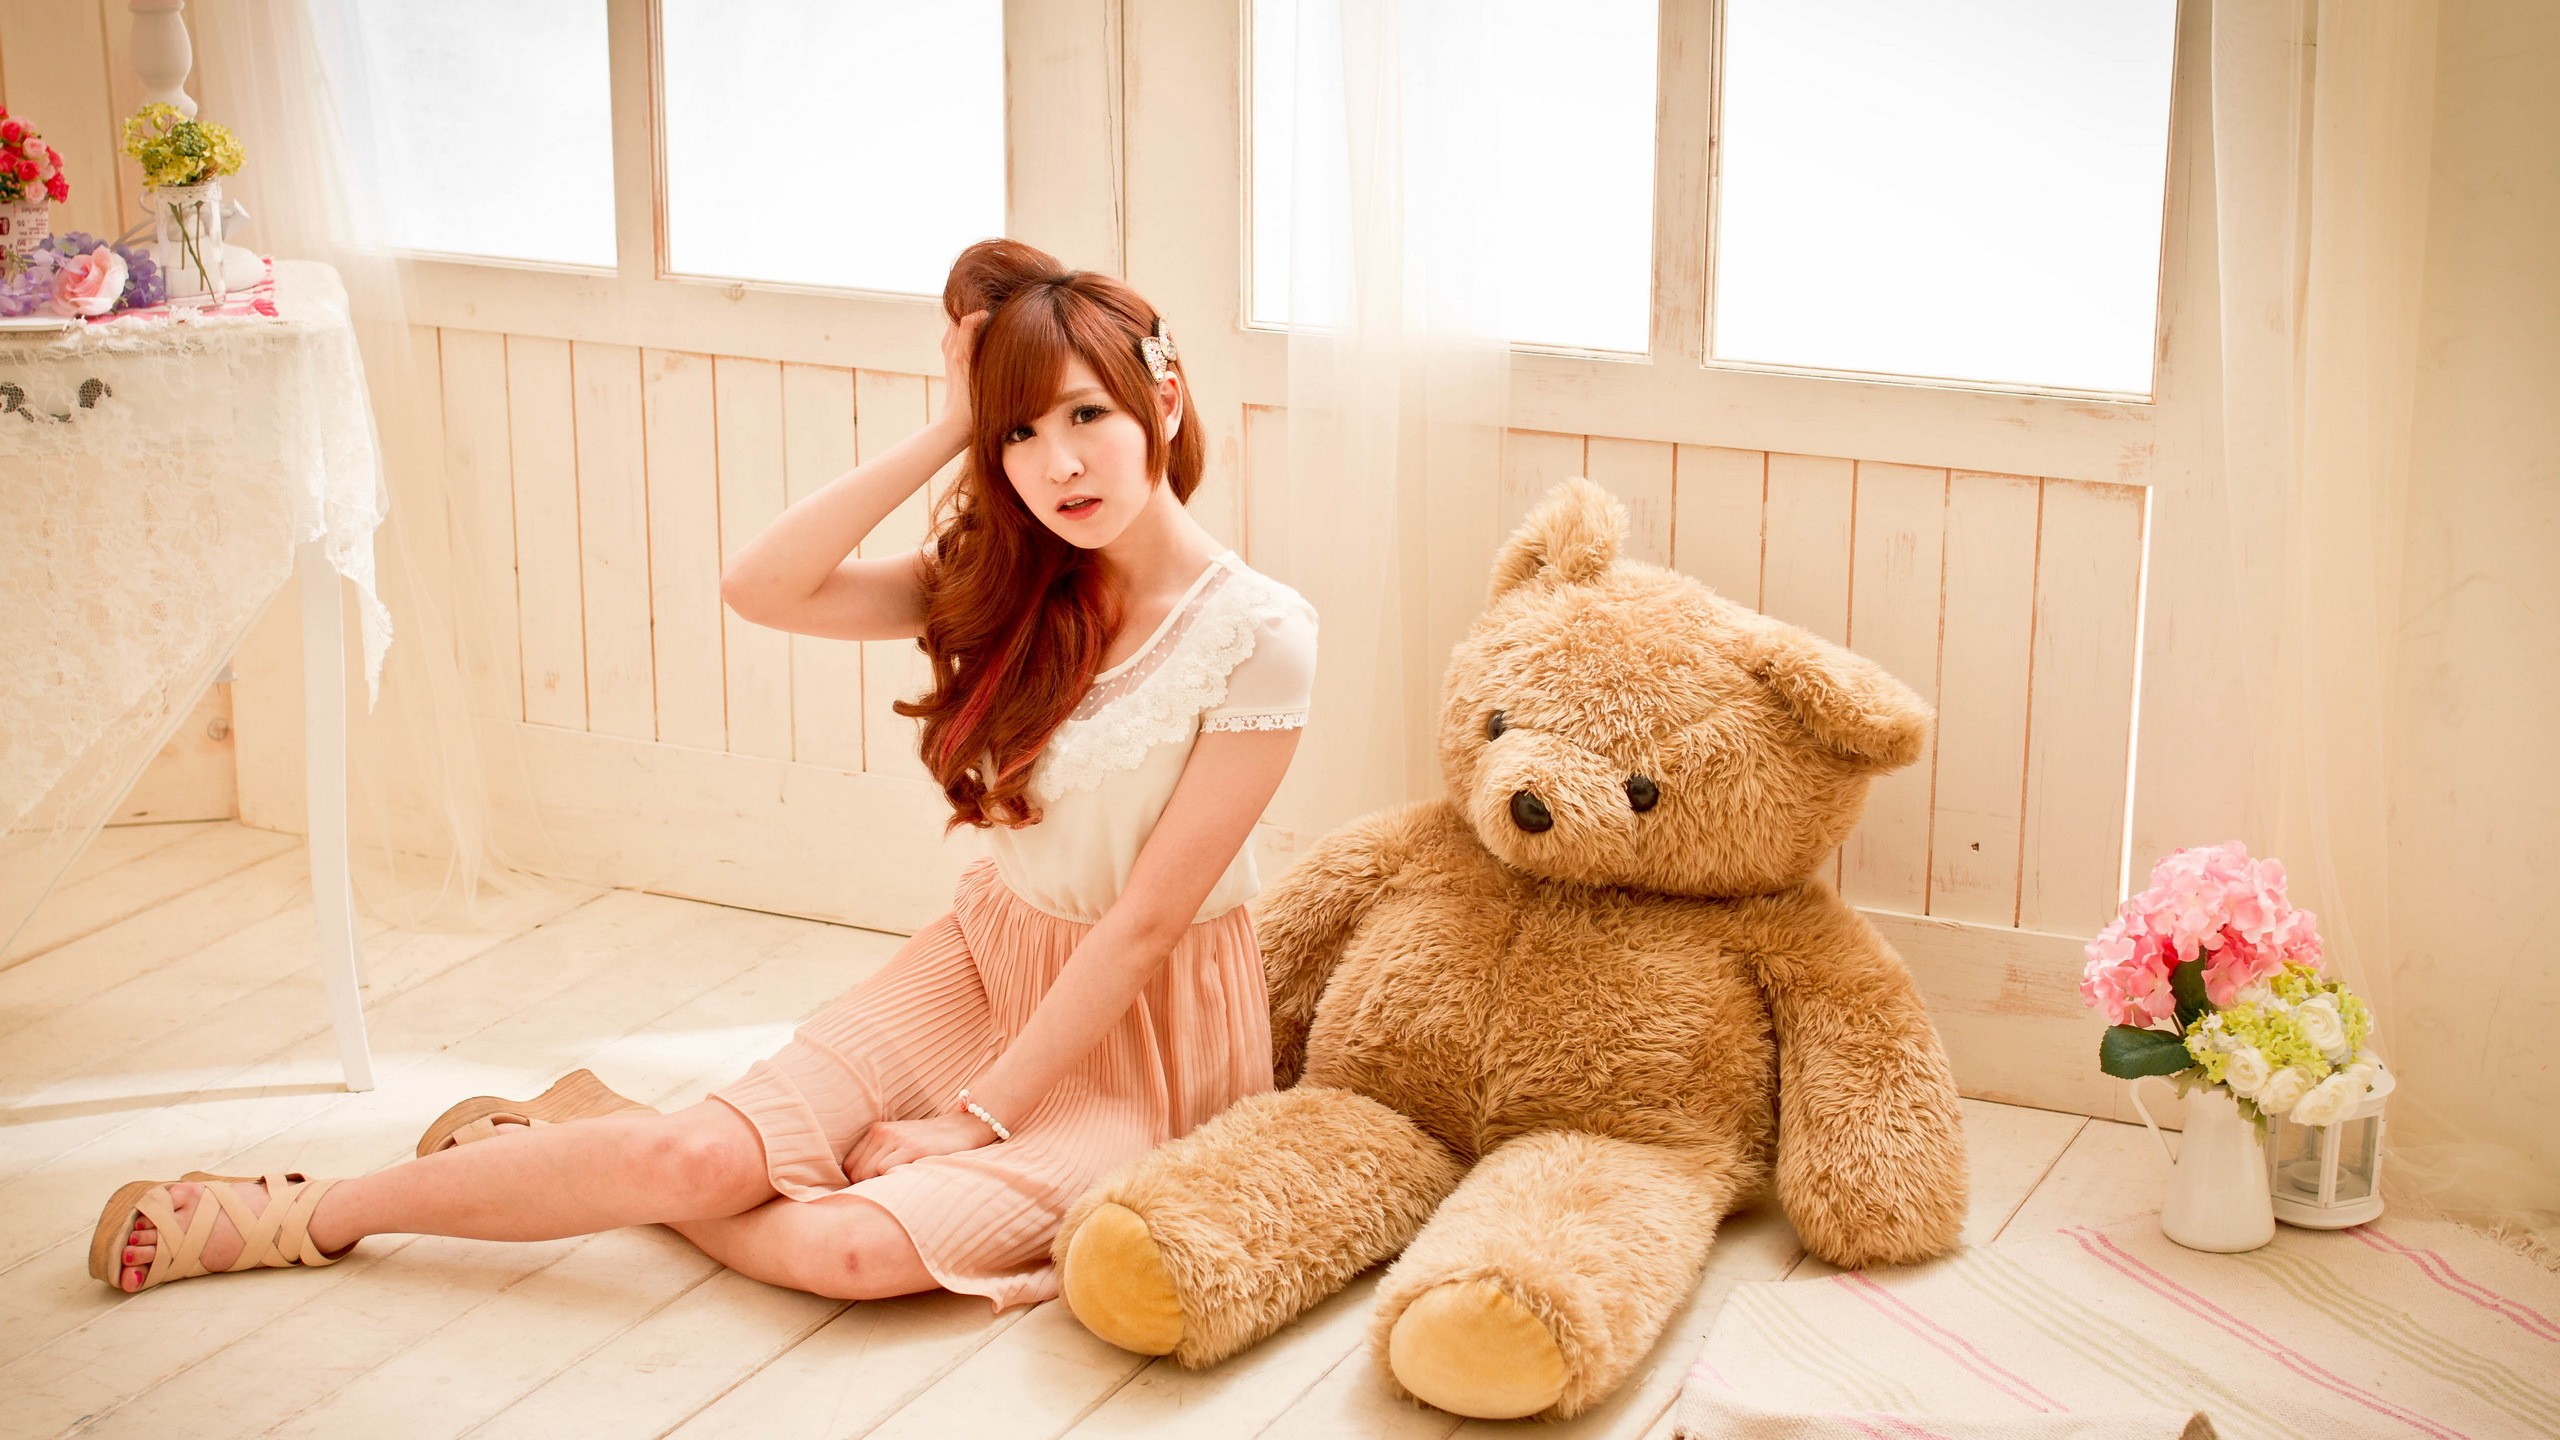 People 2560x1440 teddy bears Asian women model women indoors indoors painted toenails plush toy dyed hair long hair redhead sitting on the floor looking at viewer